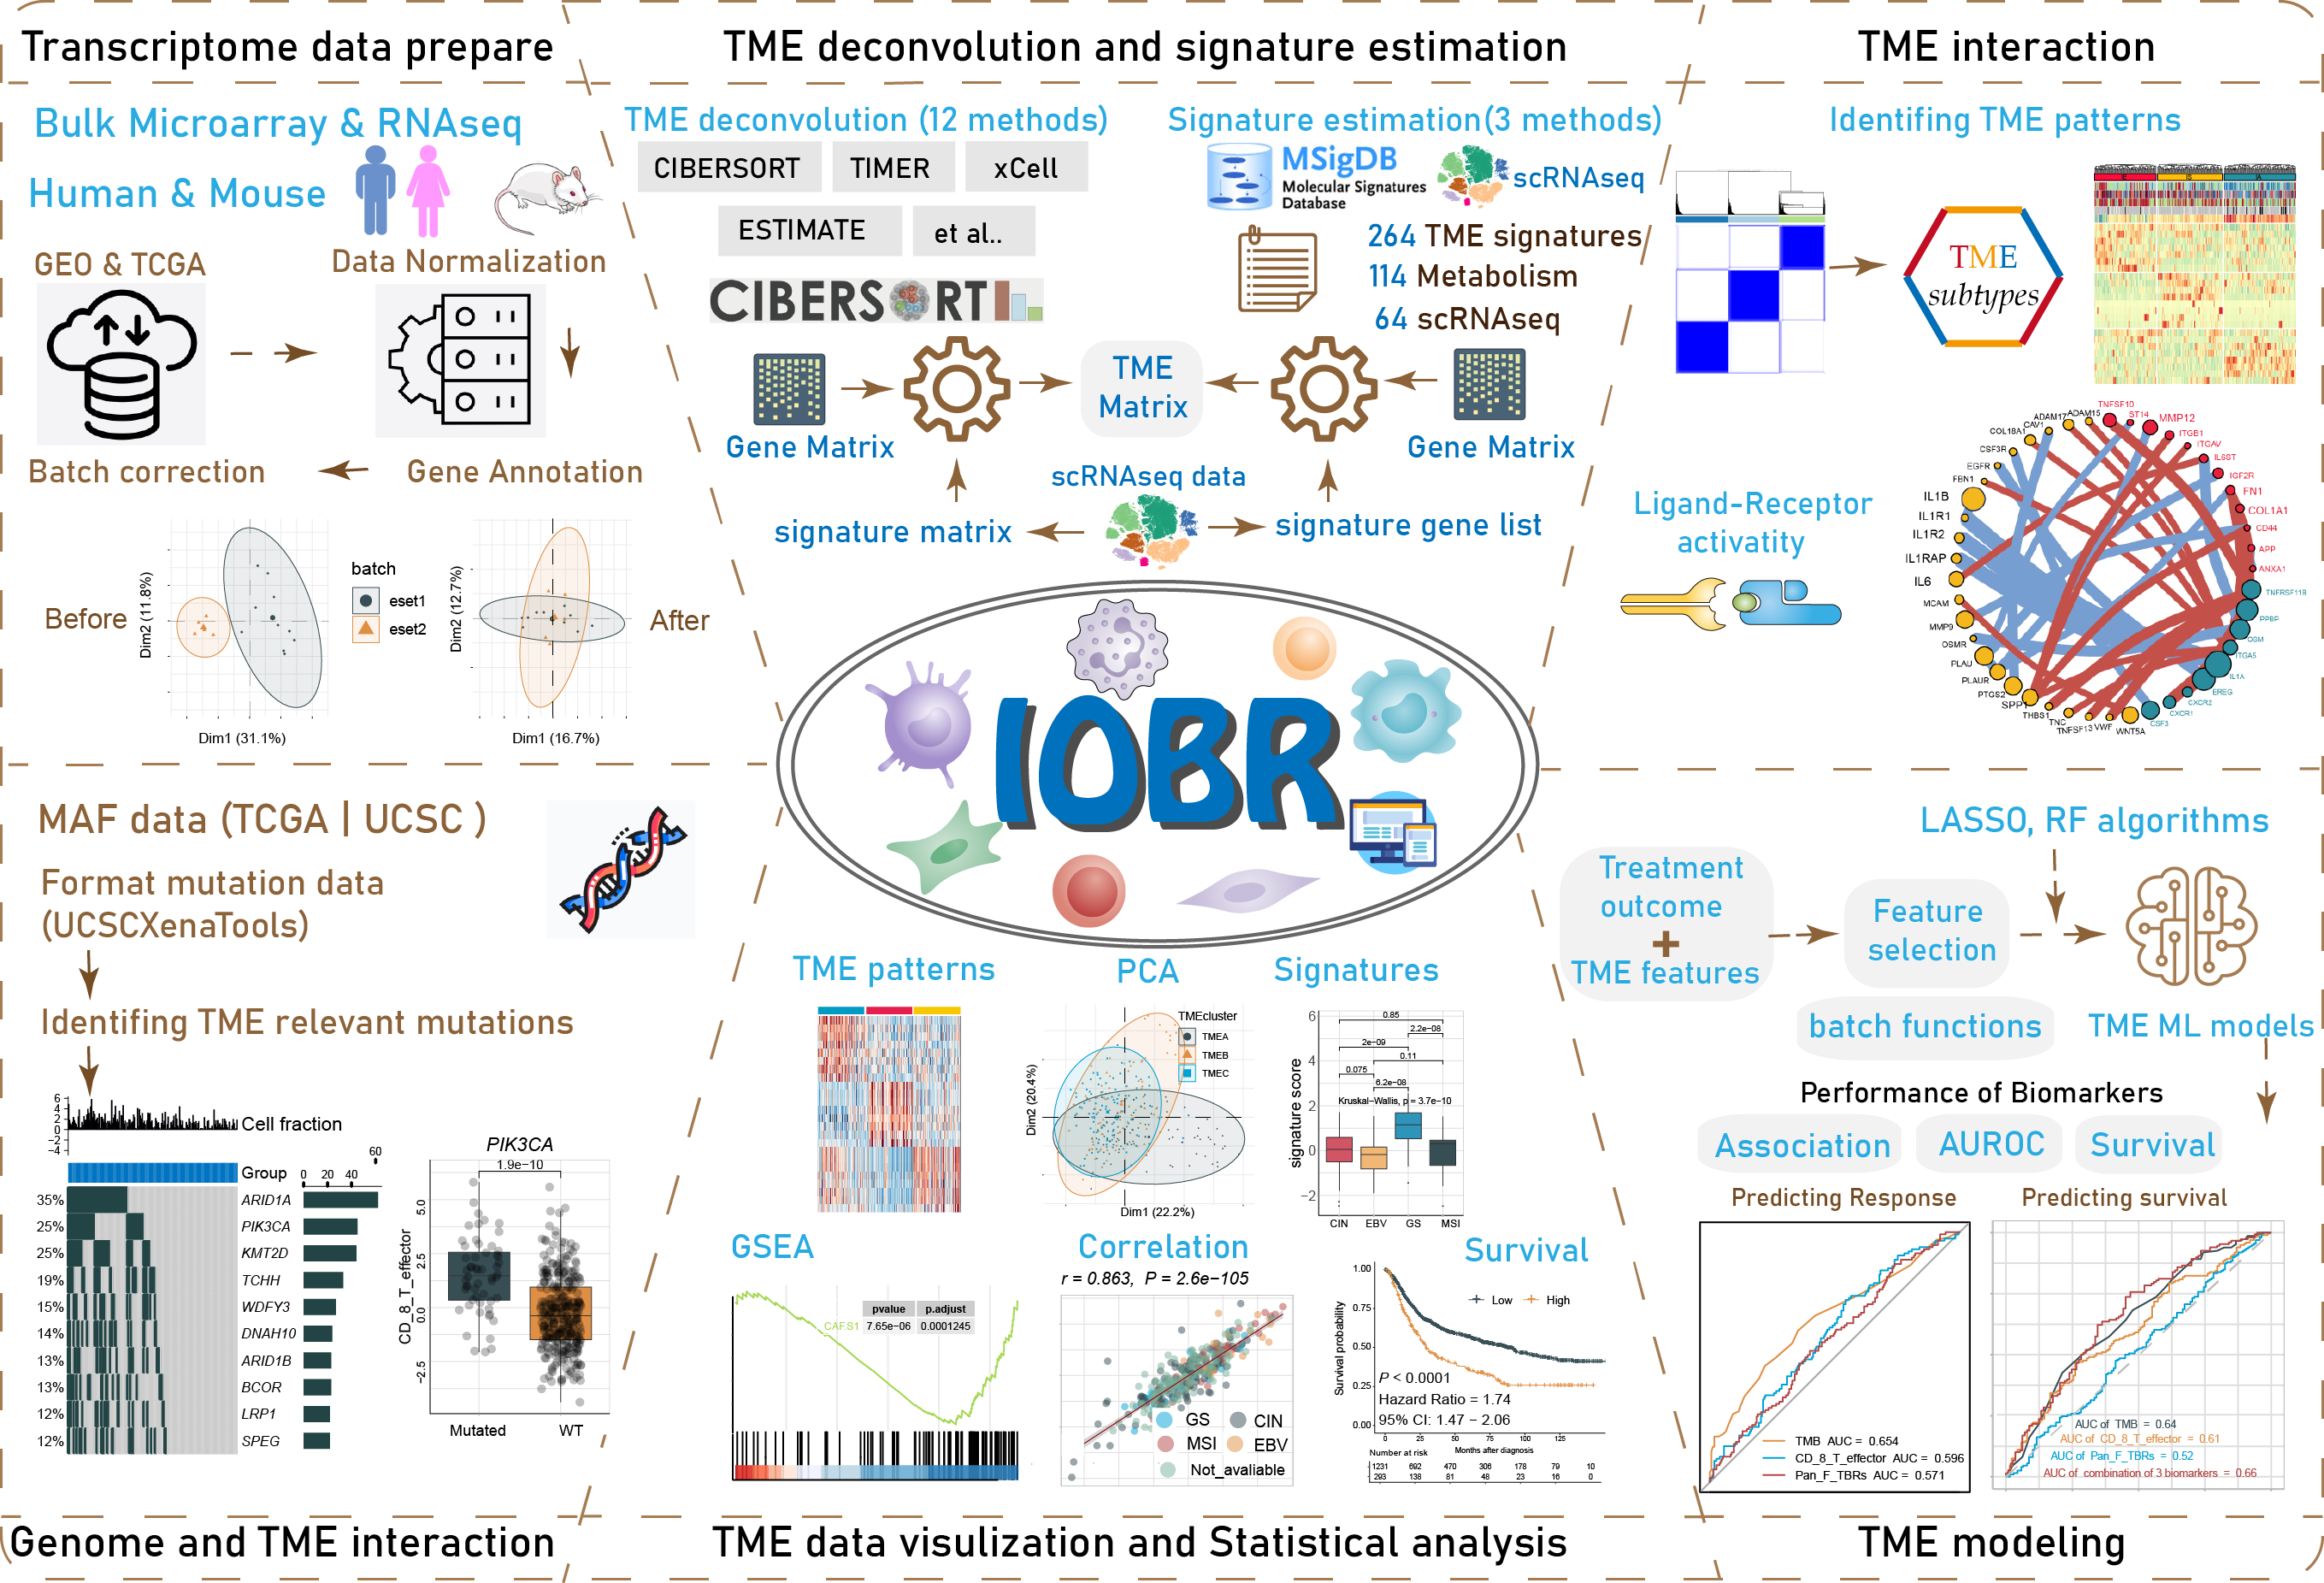 The workflow of IOBR